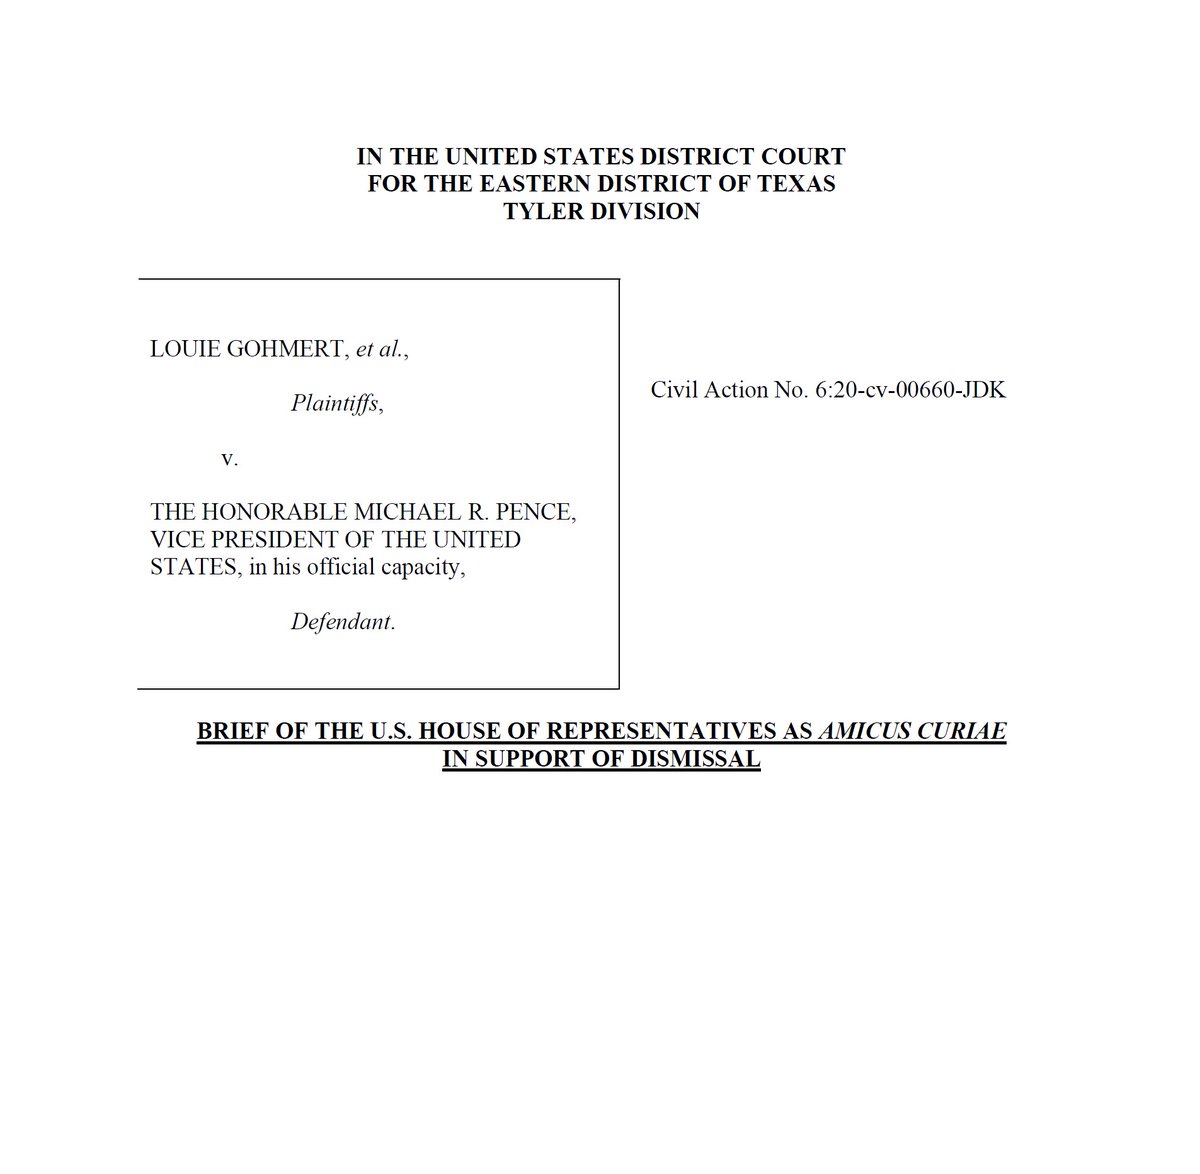 Election Update - Gohmert - House of Representatives Amicus:The proposed amicus brief from the House of Representatives is up. Let's take a look.  https://www.courtlistener.com/recap/gov.uscourts.txed.203073/gov.uscourts.txed.203073.22.0.pdf